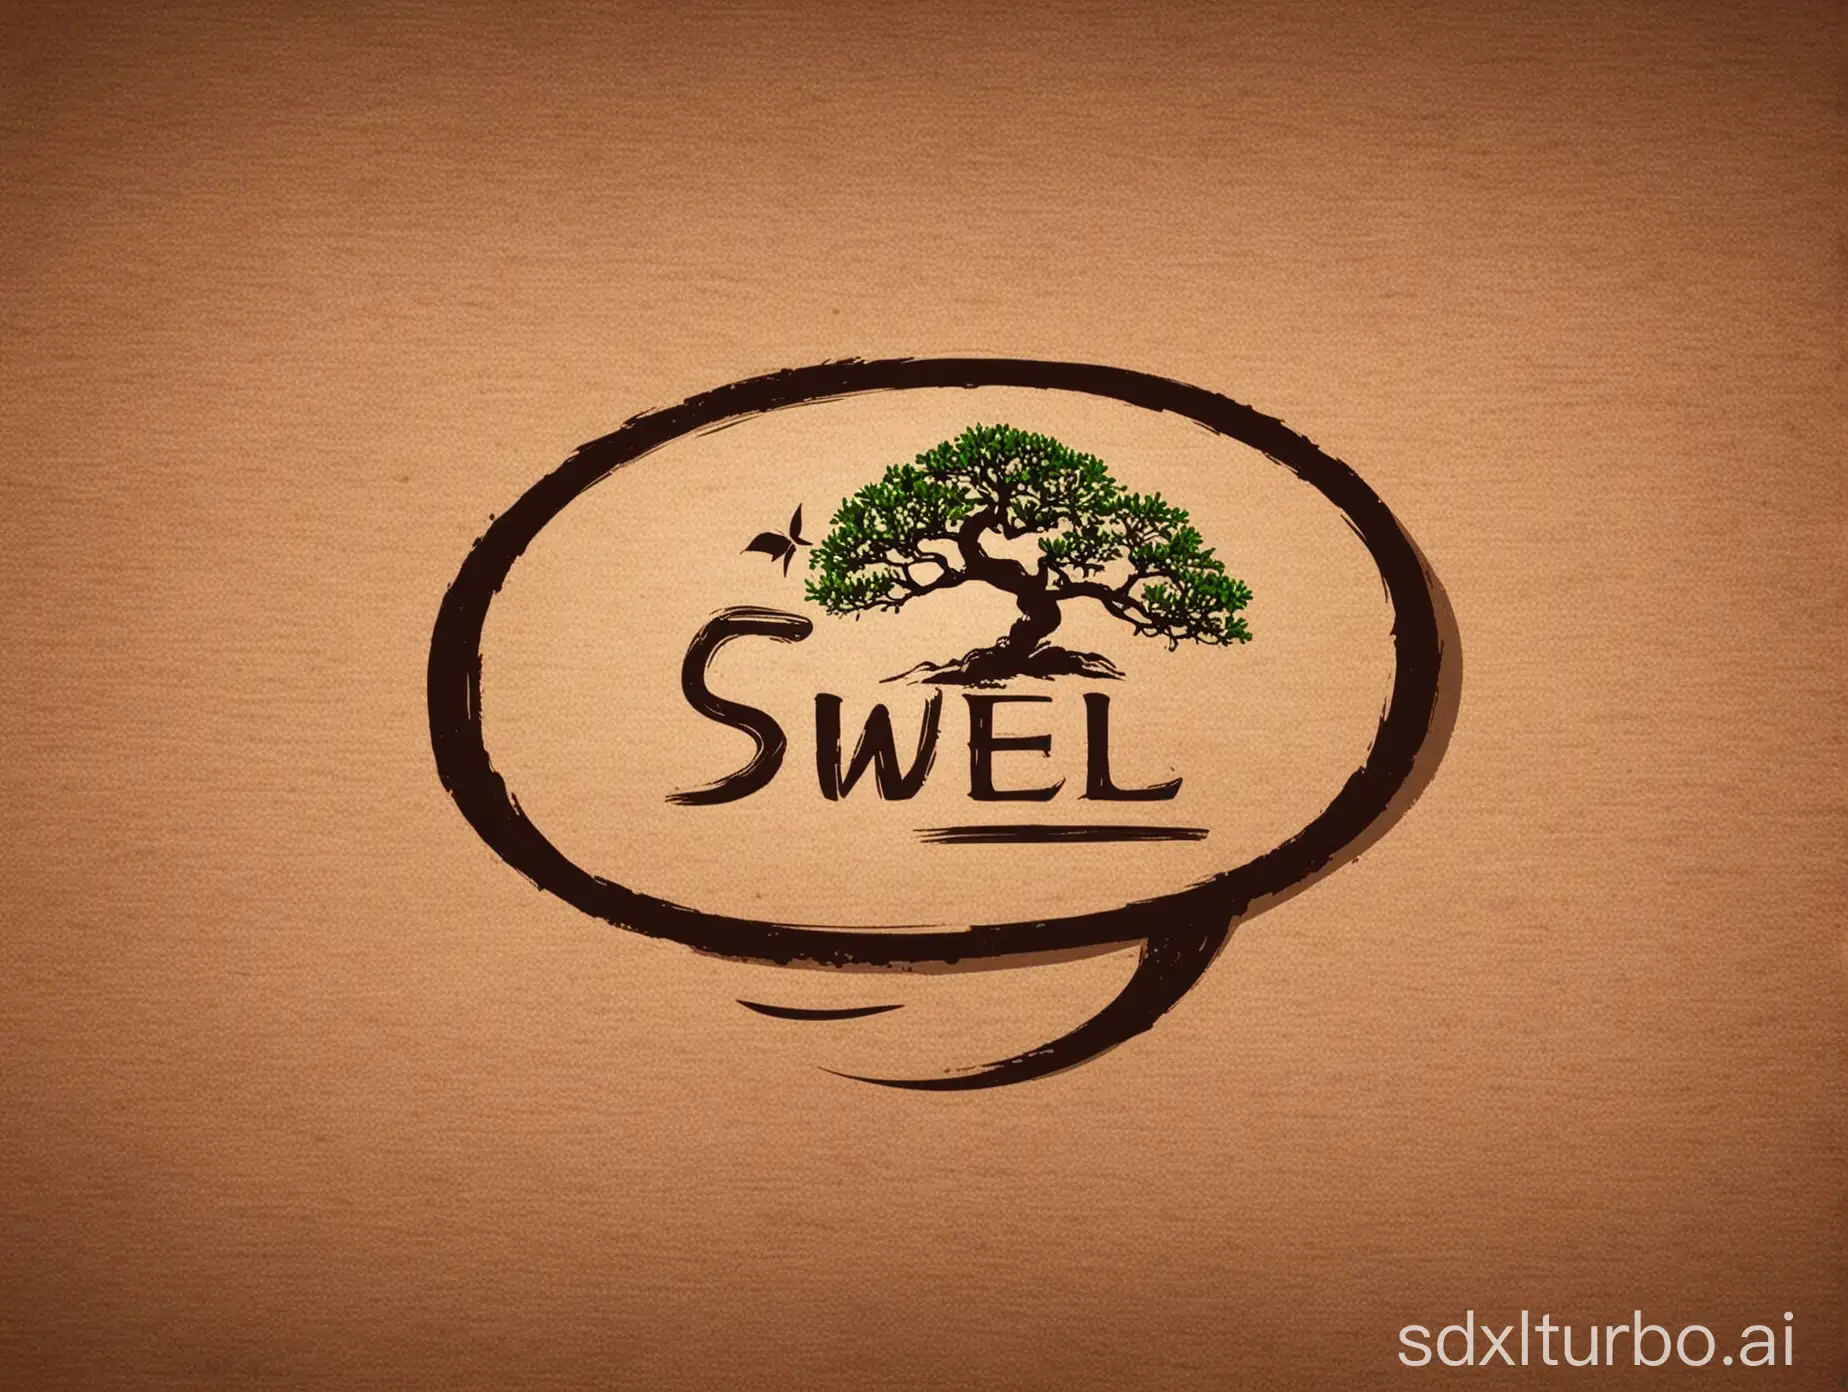 ESWELL-Logo-Design-for-Outdoor-Sports-Equipment-and-Bonsai-Pots